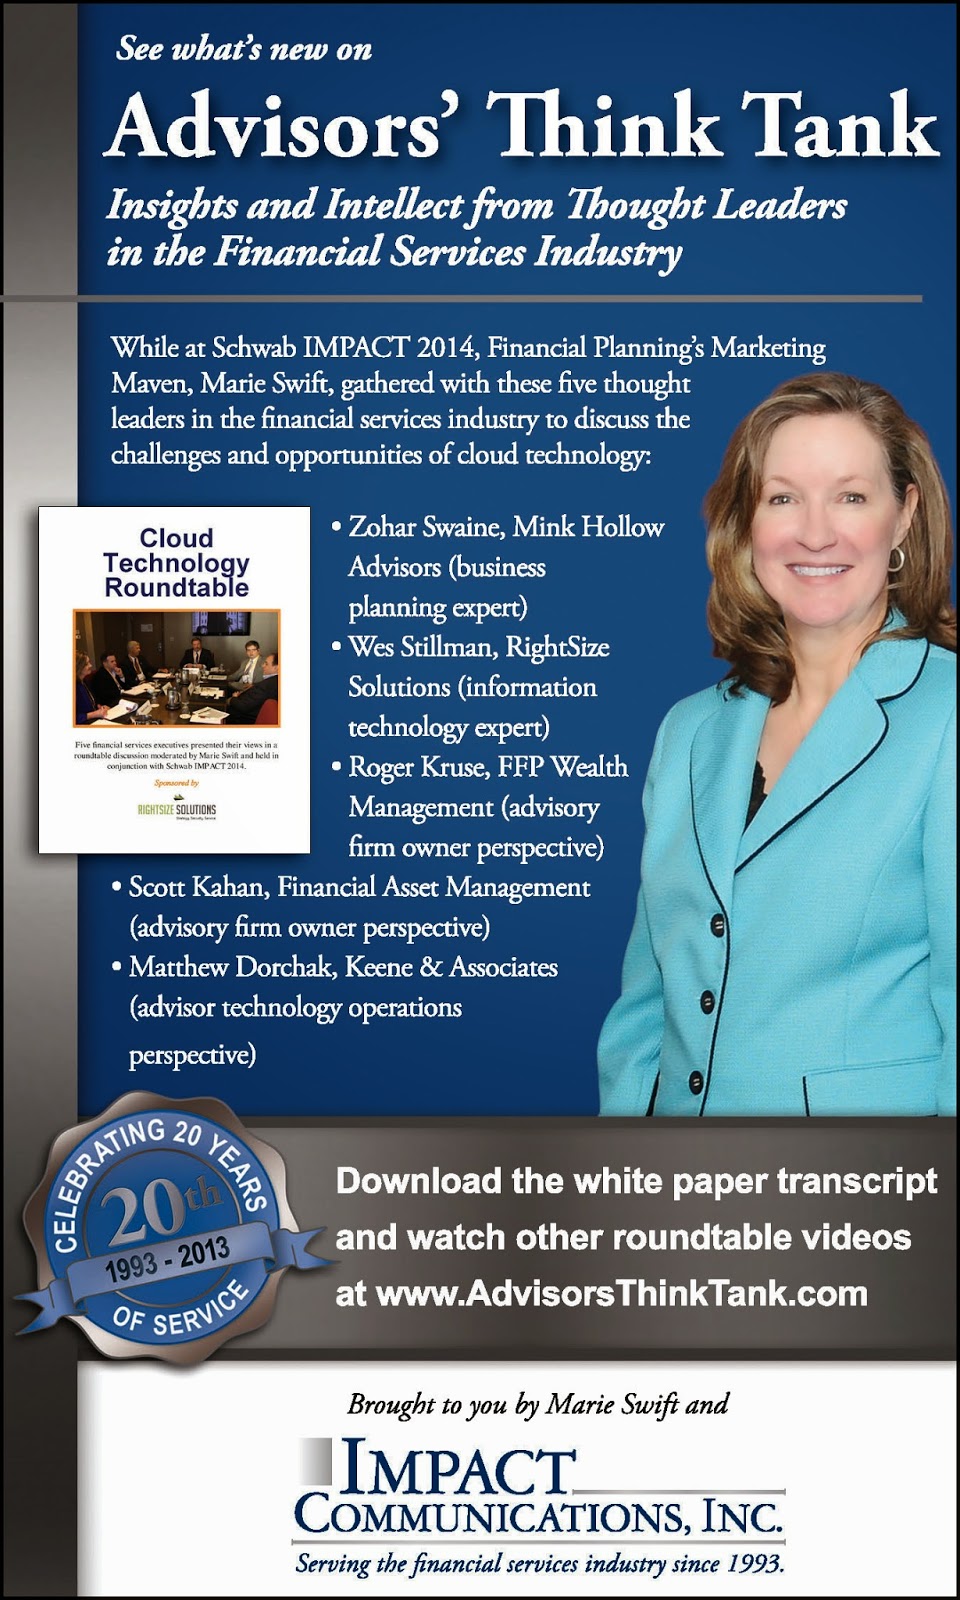  Click to access videos and white paper.